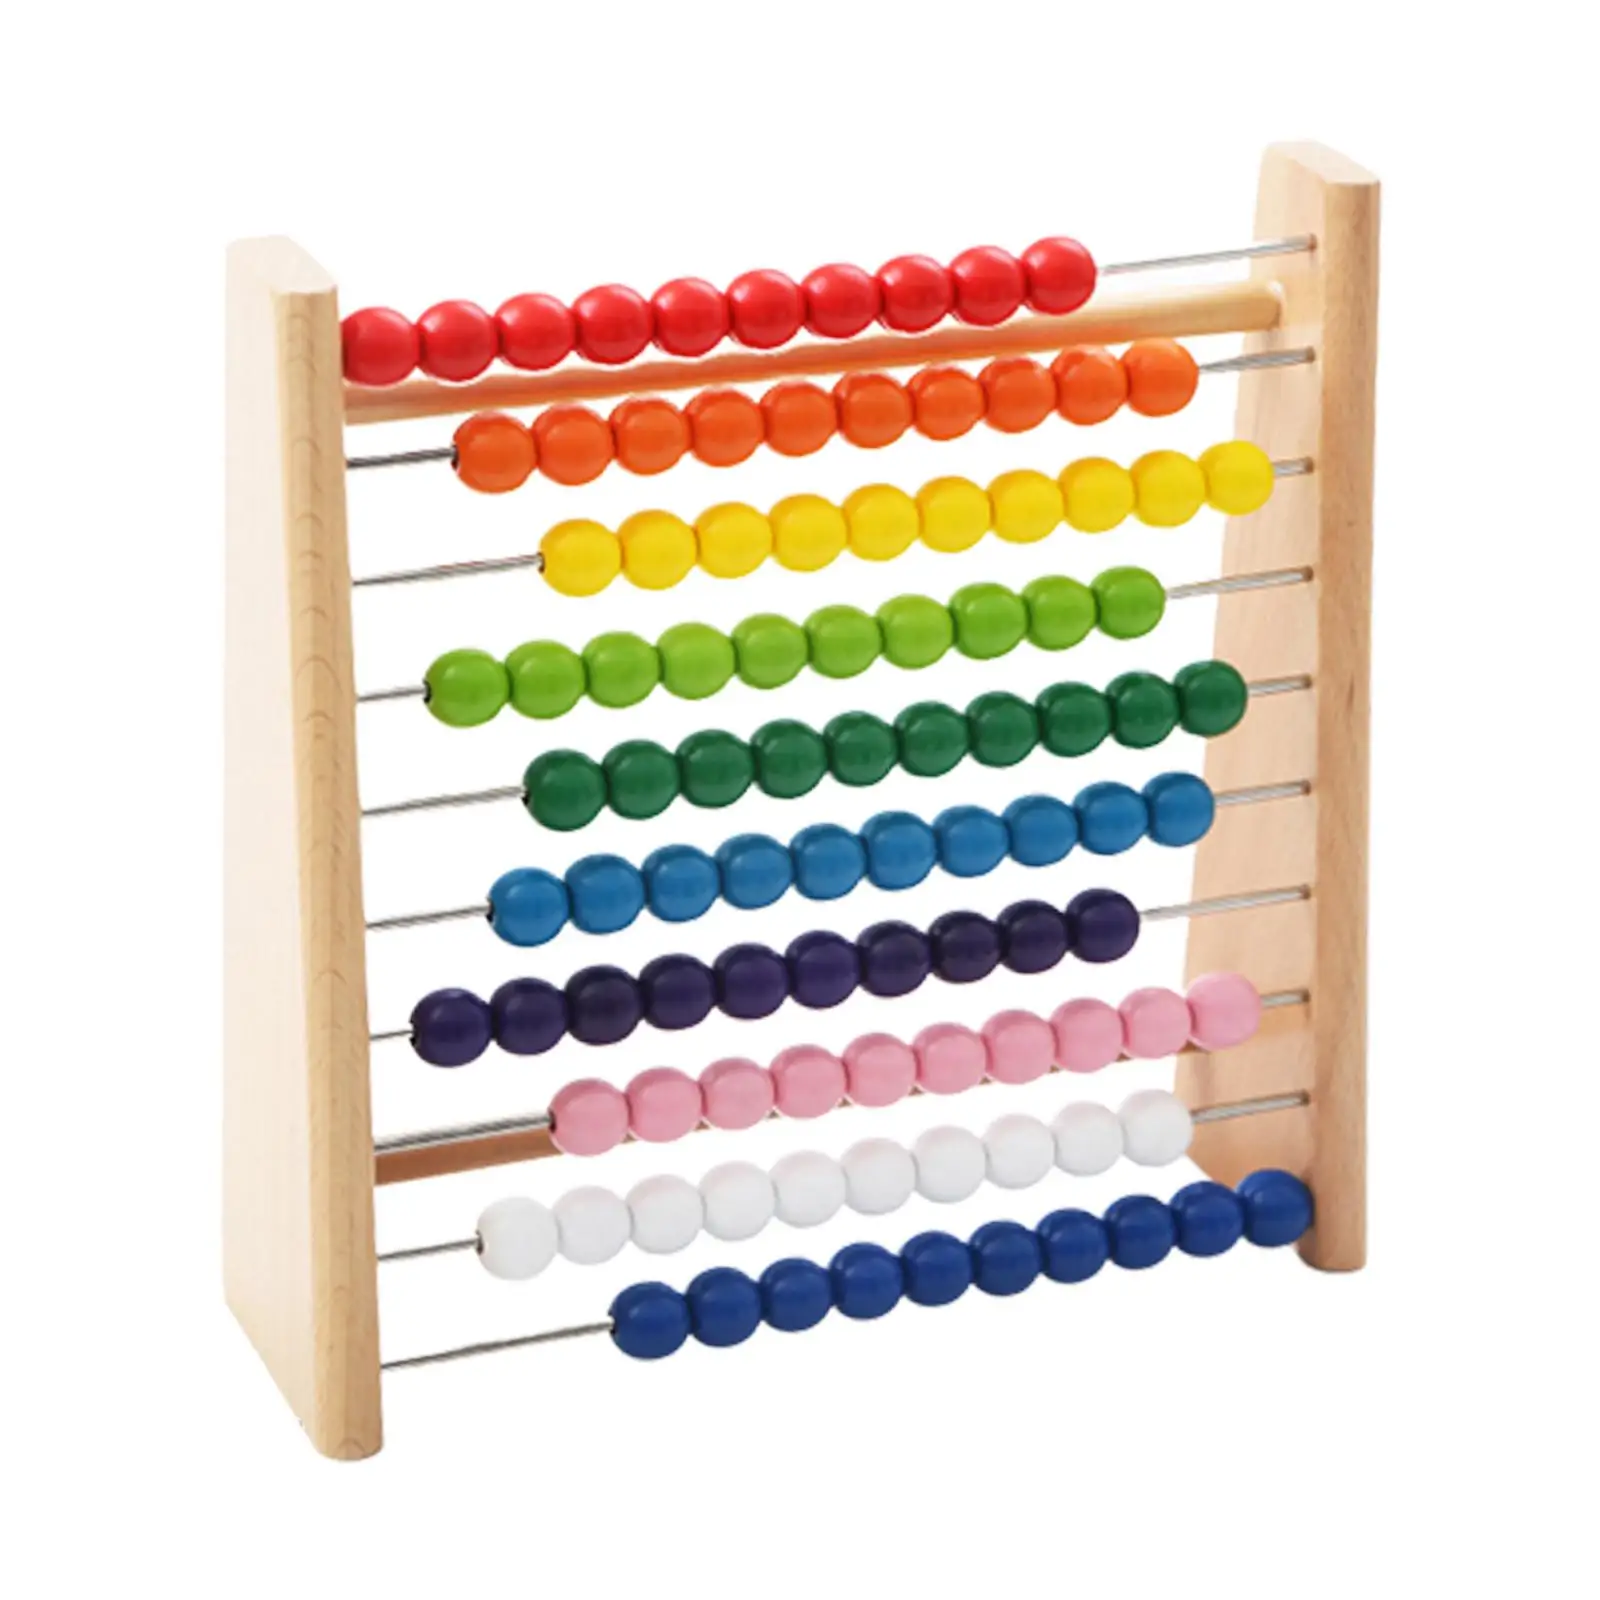 Calculating Beads Abacus Classic Counting Tool Math Games Educational Montessori Math Toy for Girls Boys Children Birthday Gifts